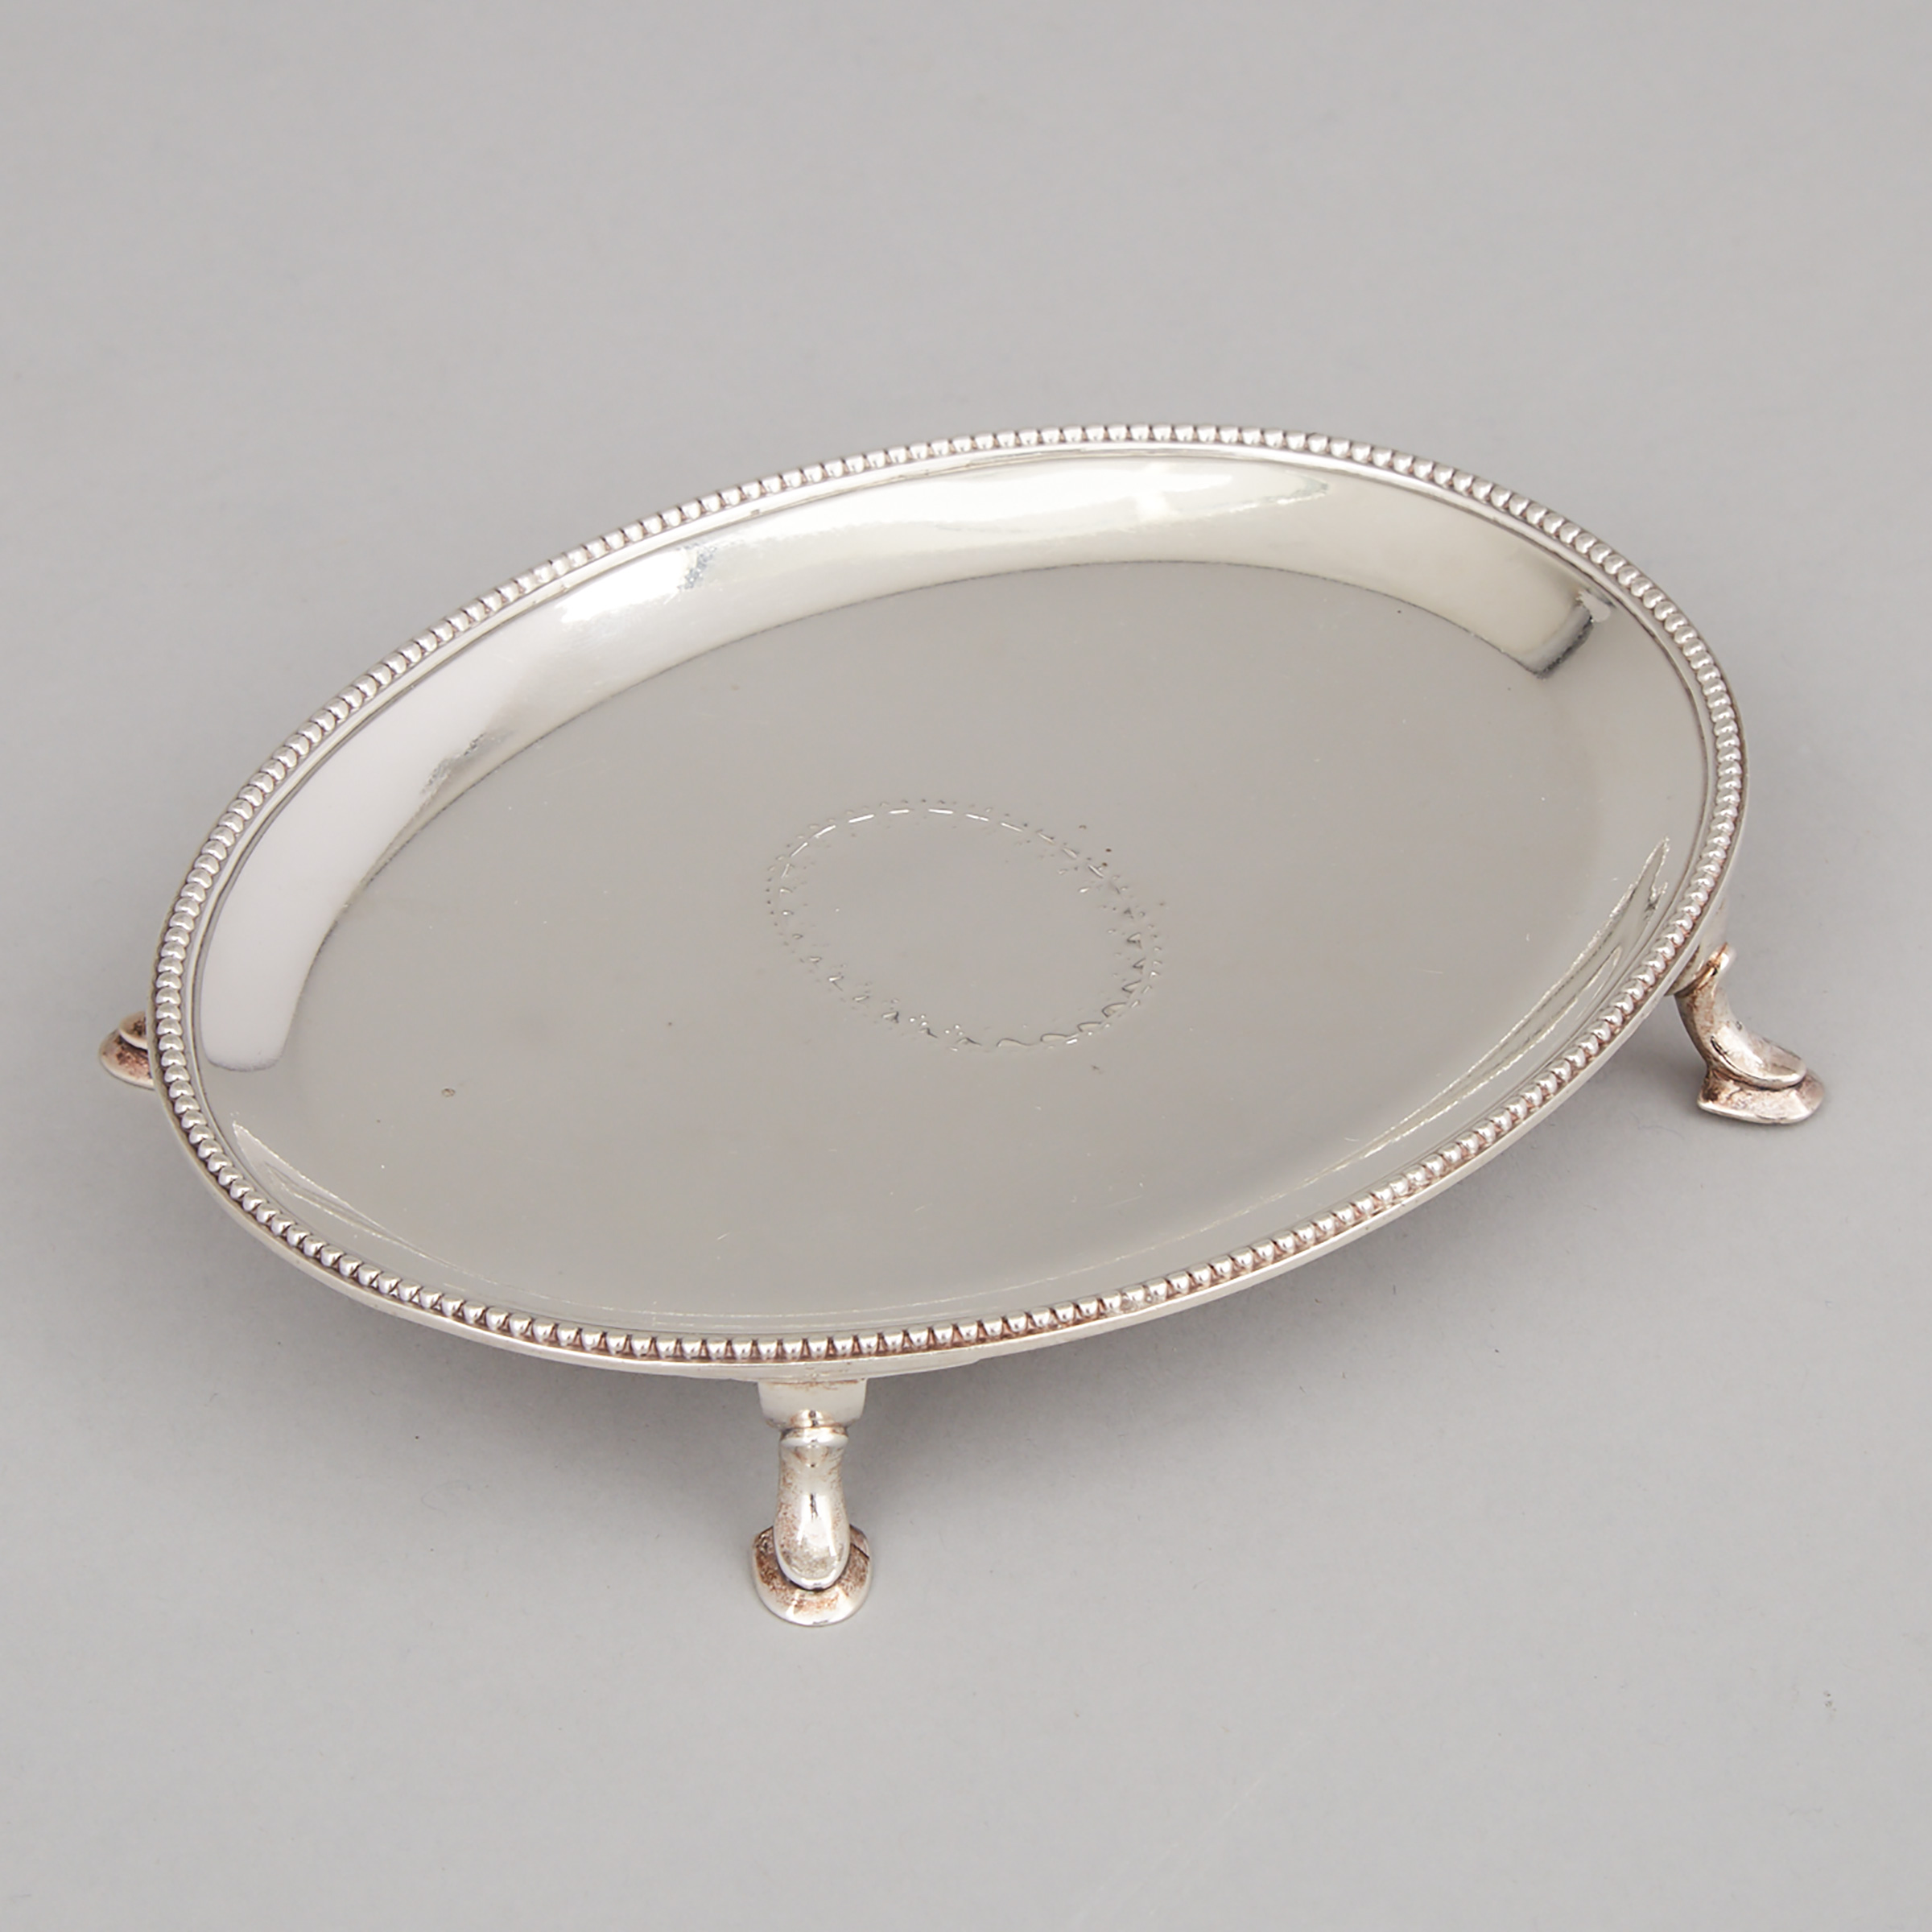 George III Silver Oval Teapot Stand, William Plummer, London, 1780